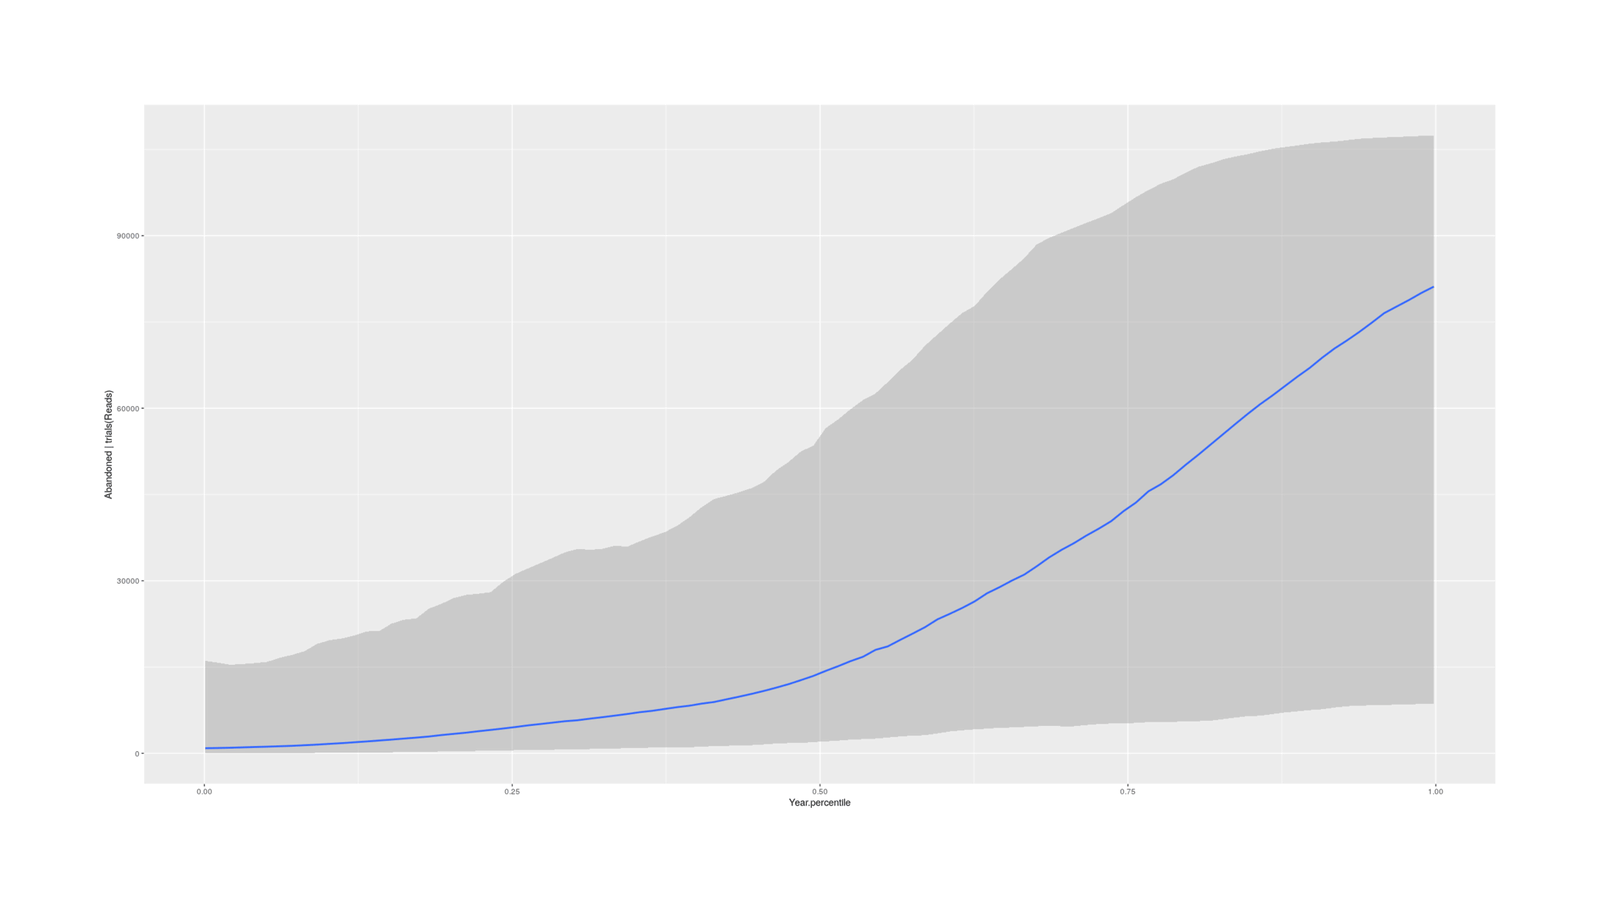 Nonlinear effect of publication date percentile on predicted GoodReads abandonment rate (spline)